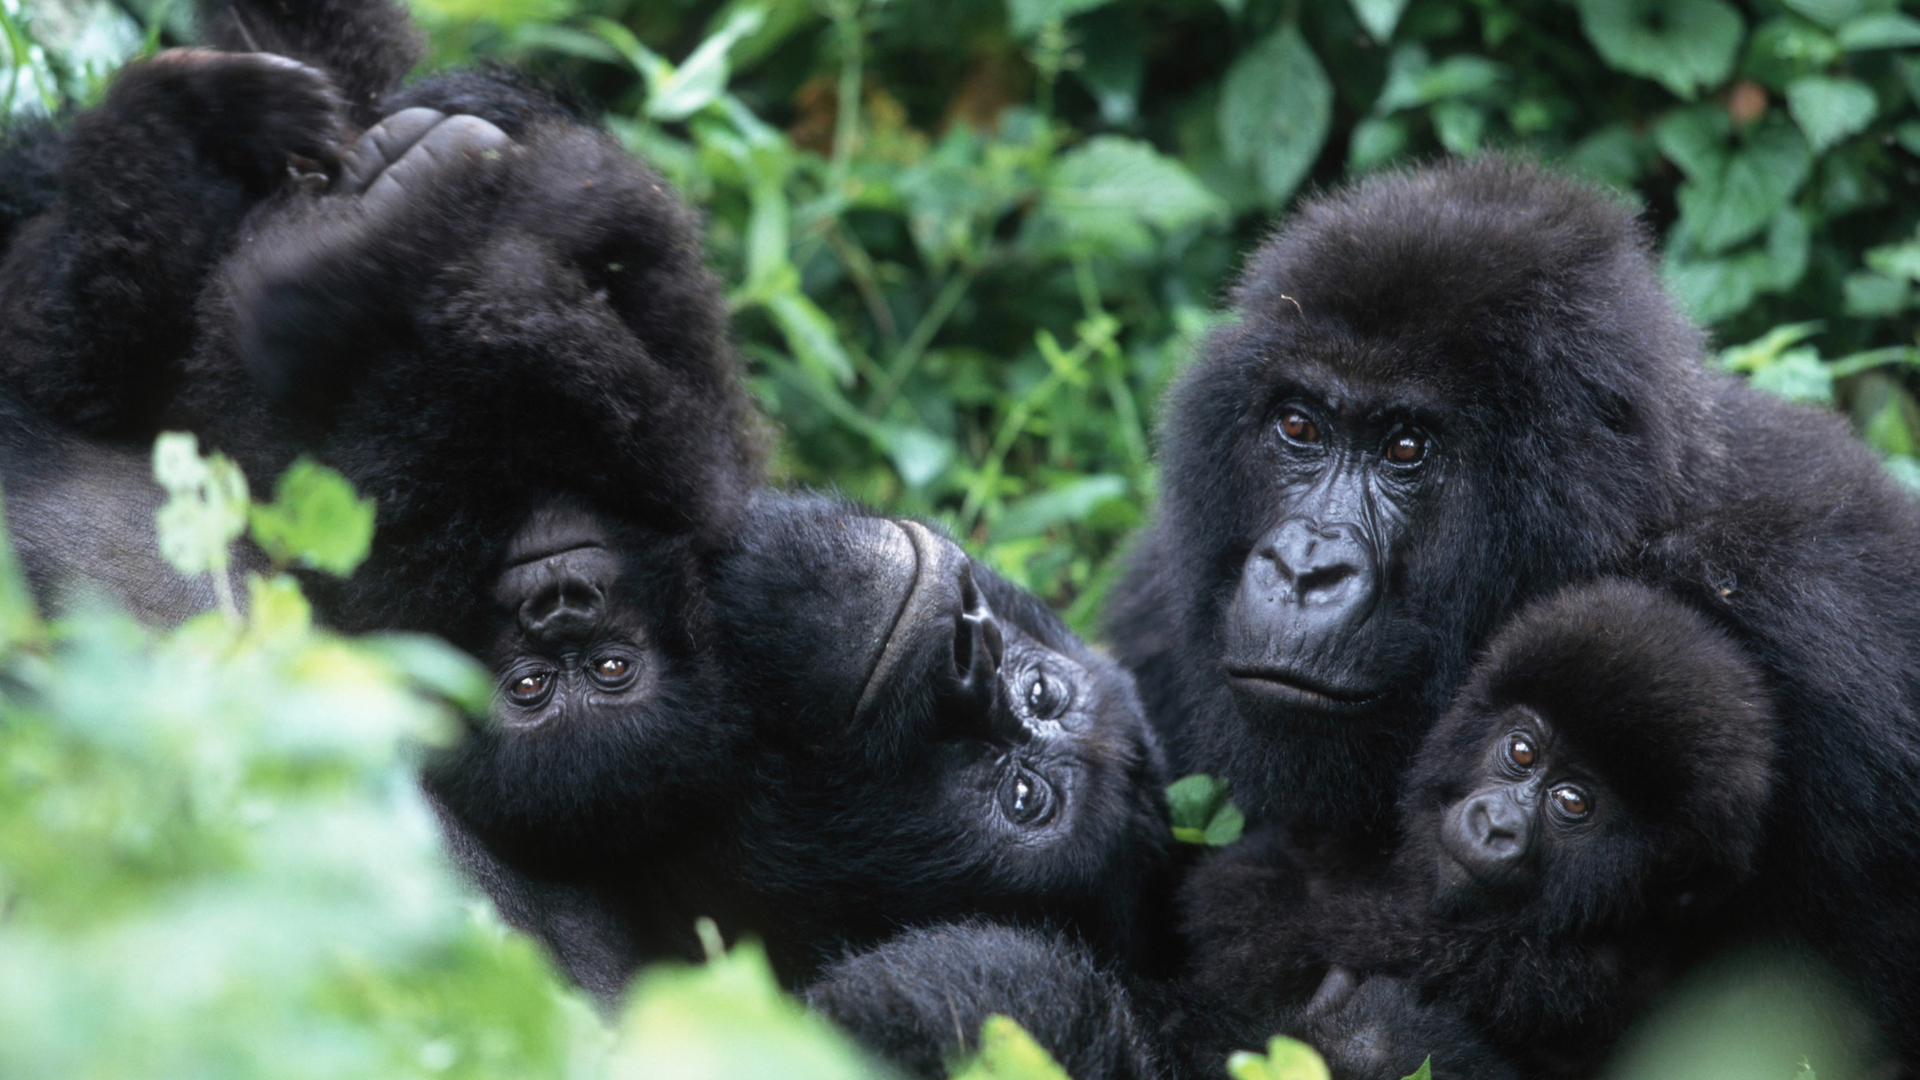 A photograph of a family of gorillas in the forest.